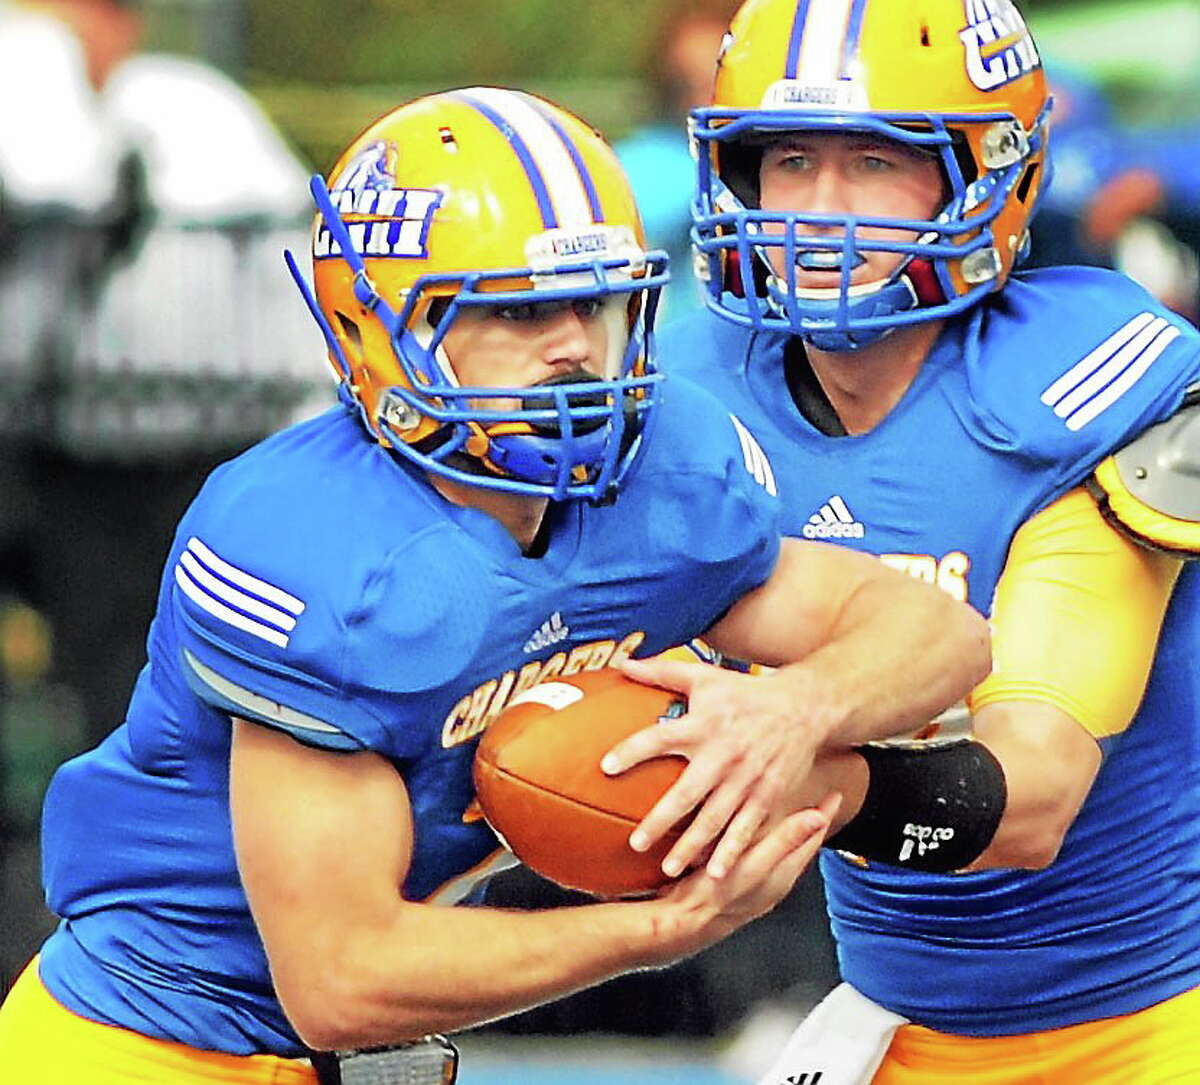 New Haven running back Mike DeCaro takes the handoff from Chargers quarterback Ronnie Nelson during the Chargers’ Oct. 19, 2013, game against Stonehill.